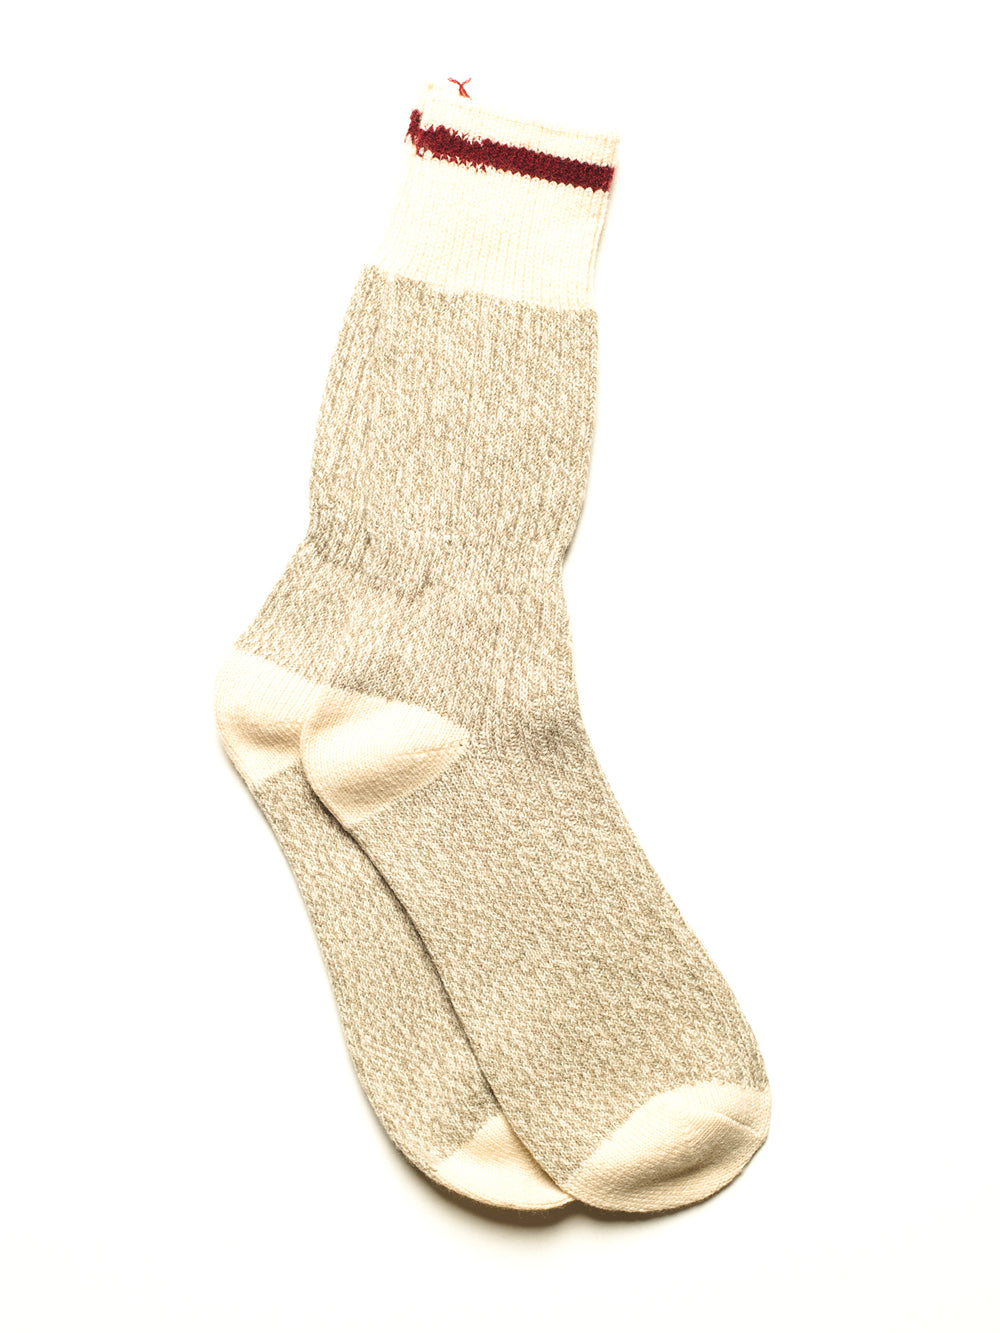 SCOUT & TRAIL COTTAGE LIFE CREW SOCKS